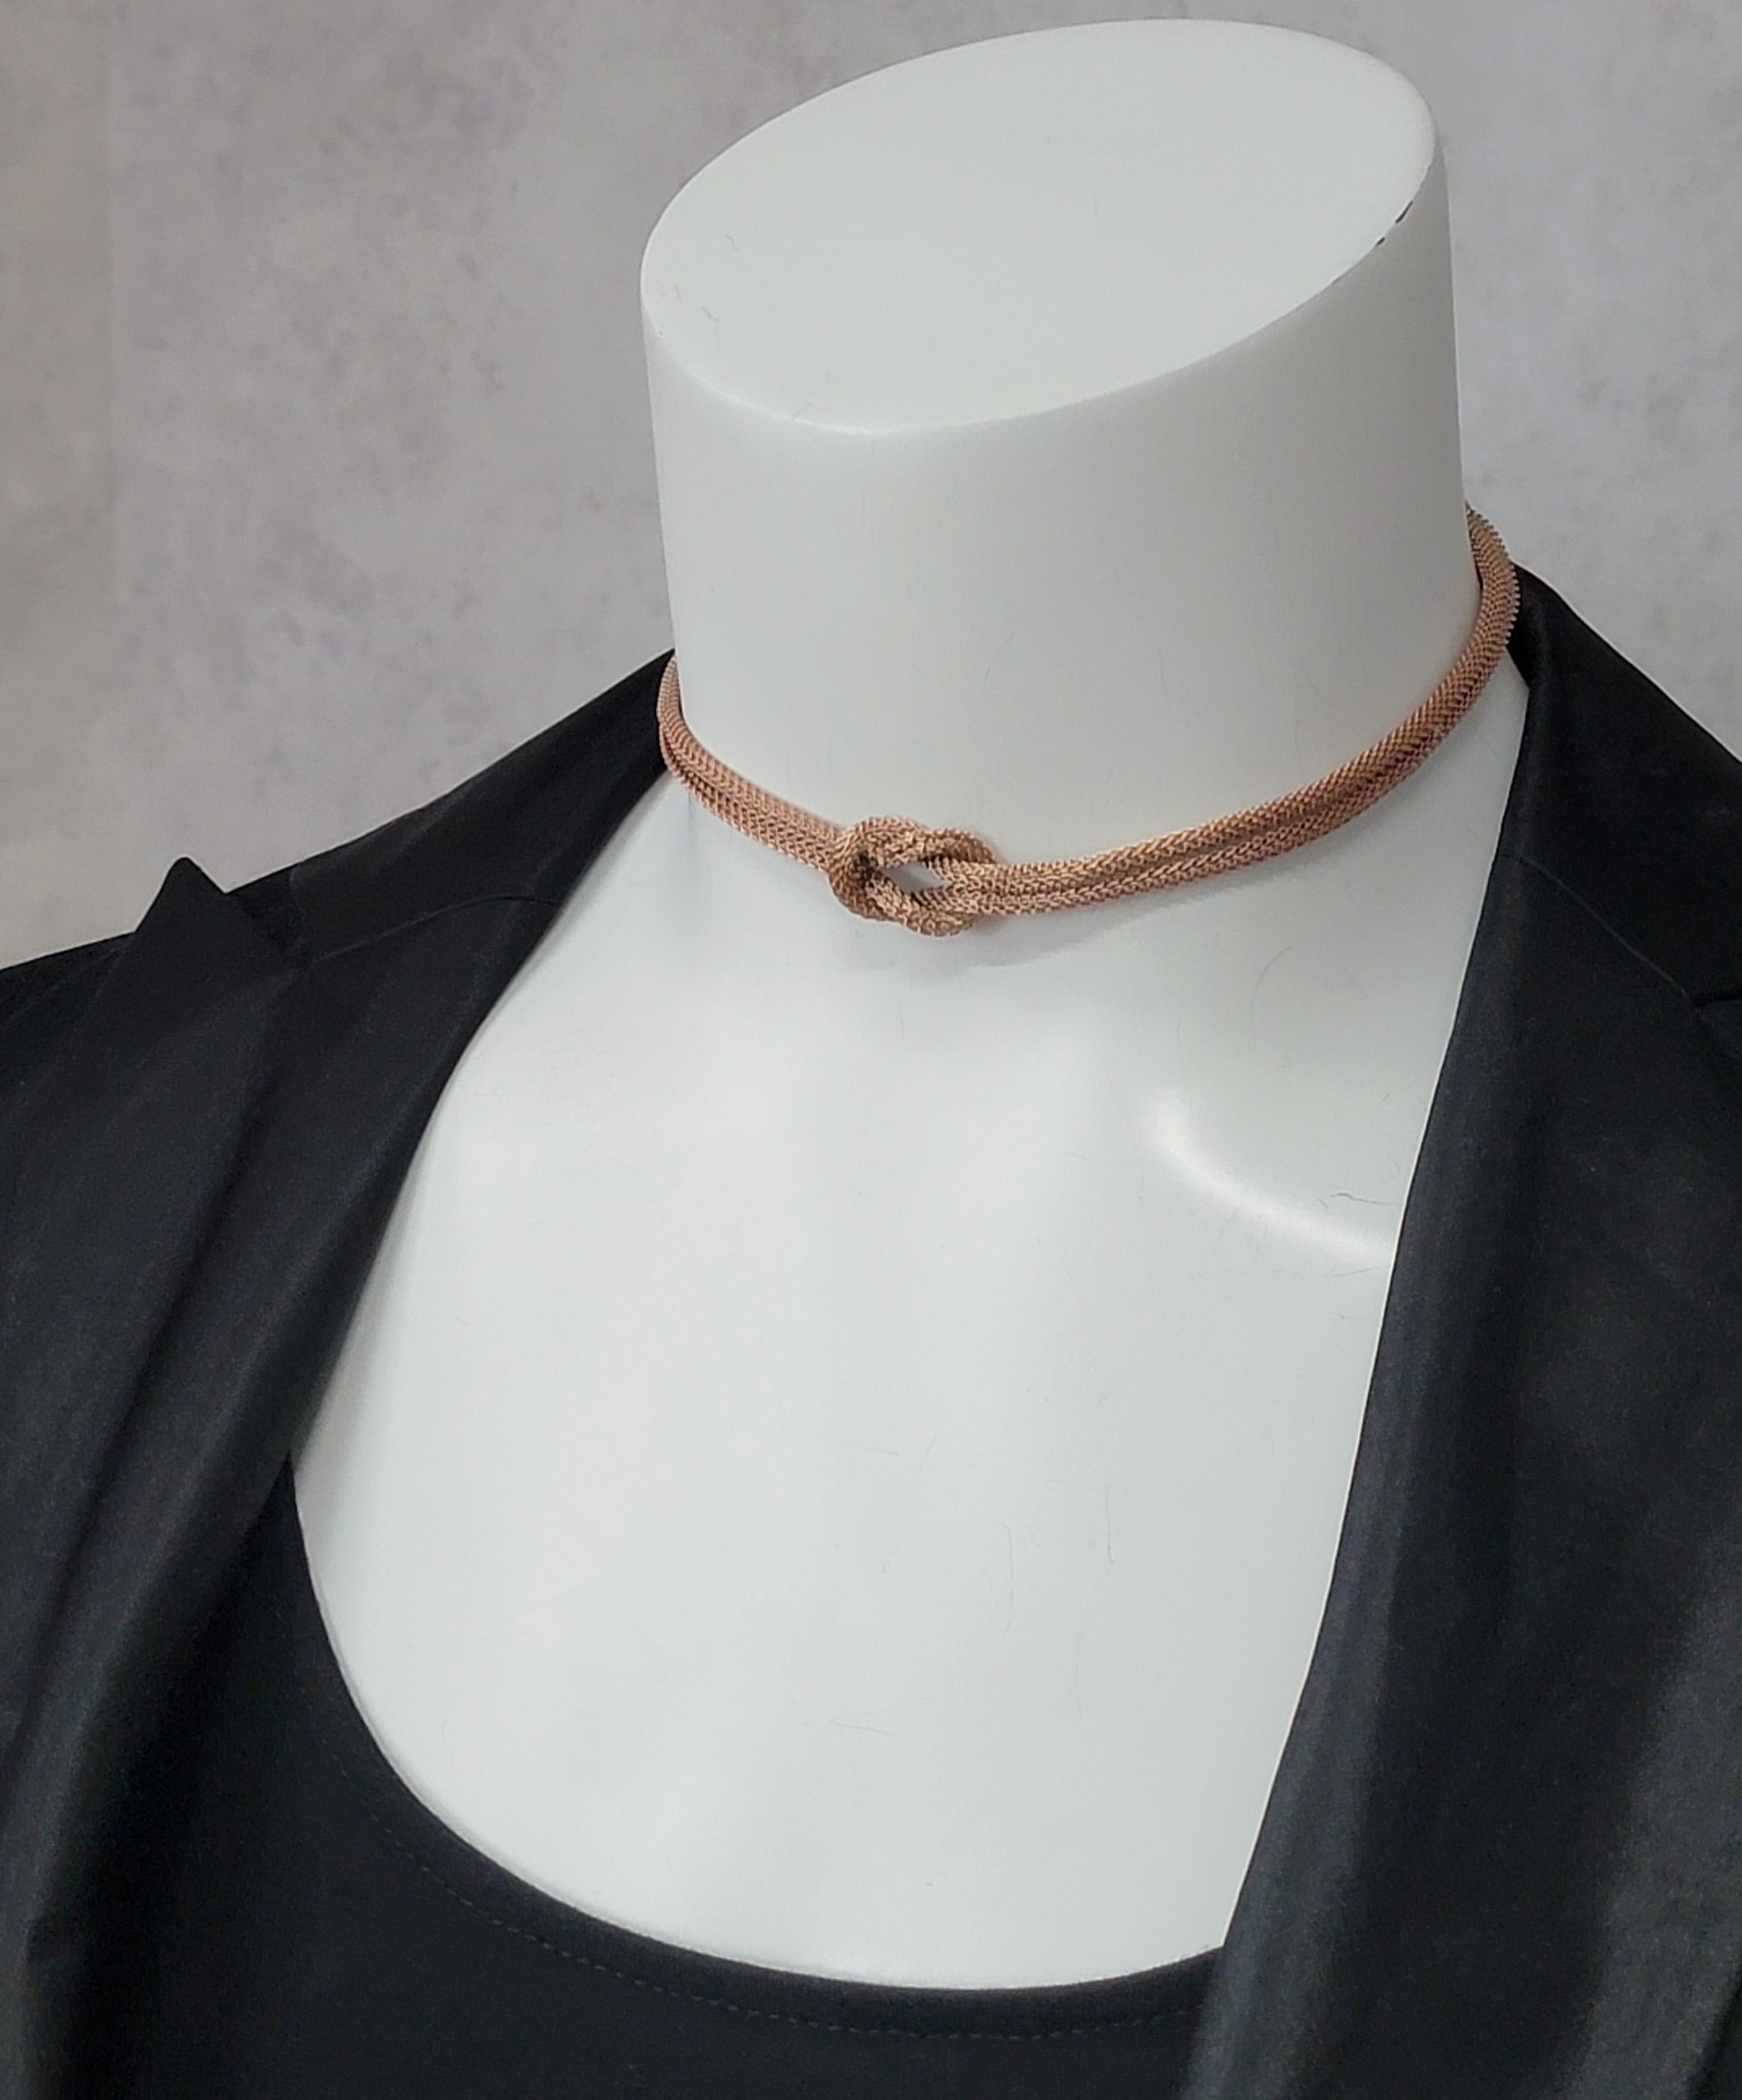 Buy Fine Choker in Stainless Steel and Powder Pink Lace, Lace Jewelry, Dog  Collar, Lingerie Necklace, Neck Level Online in India - Etsy